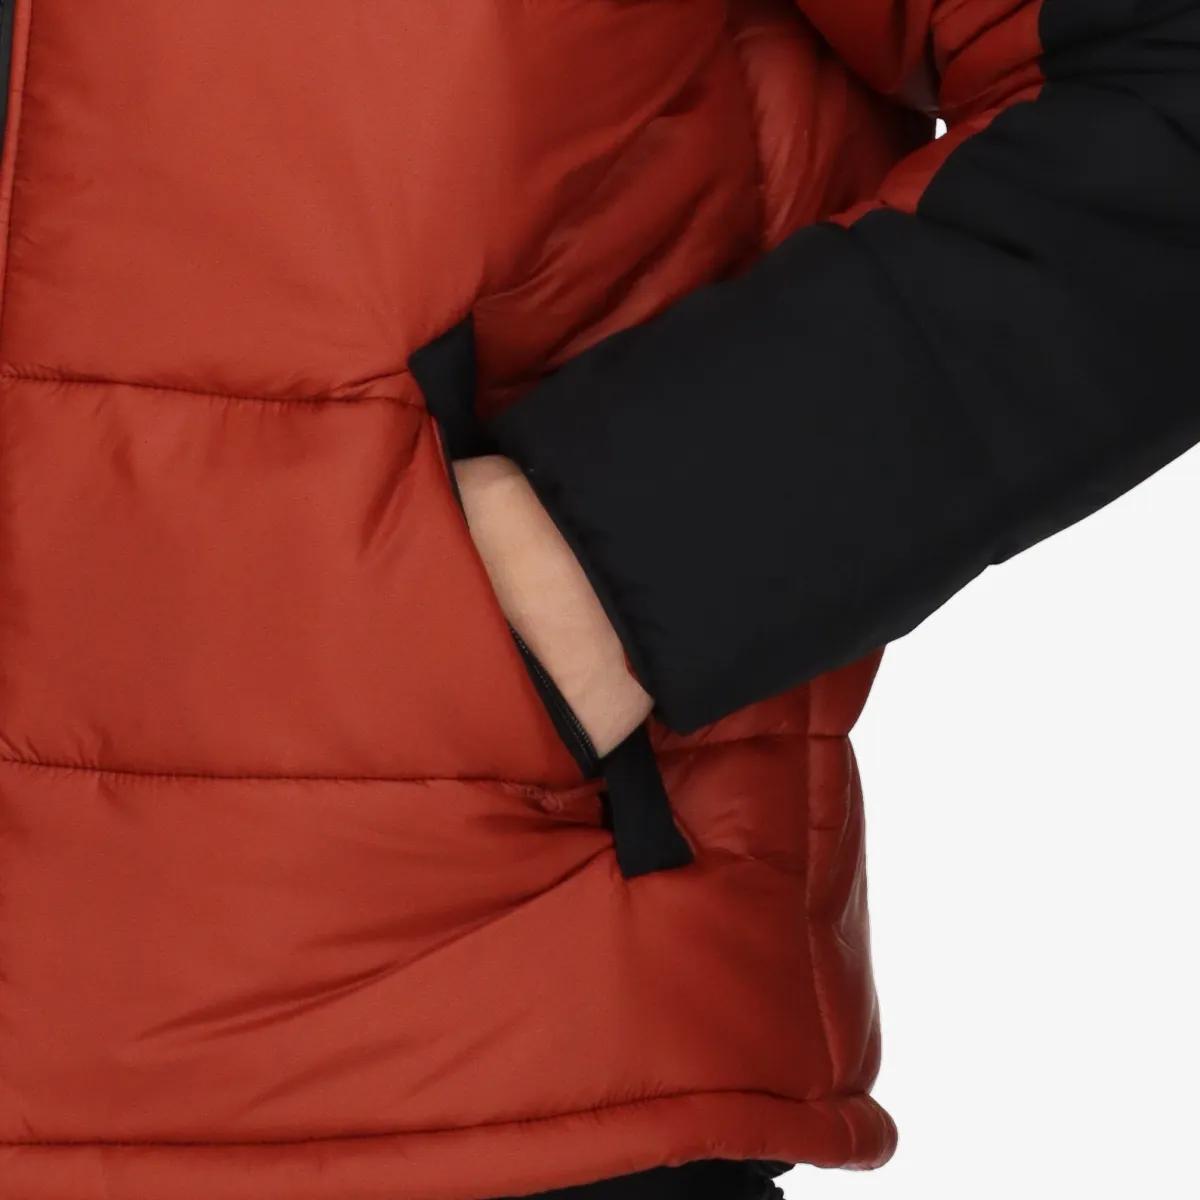 THE NORTH FACE Men’s Hmlyn Insulated Jacket 